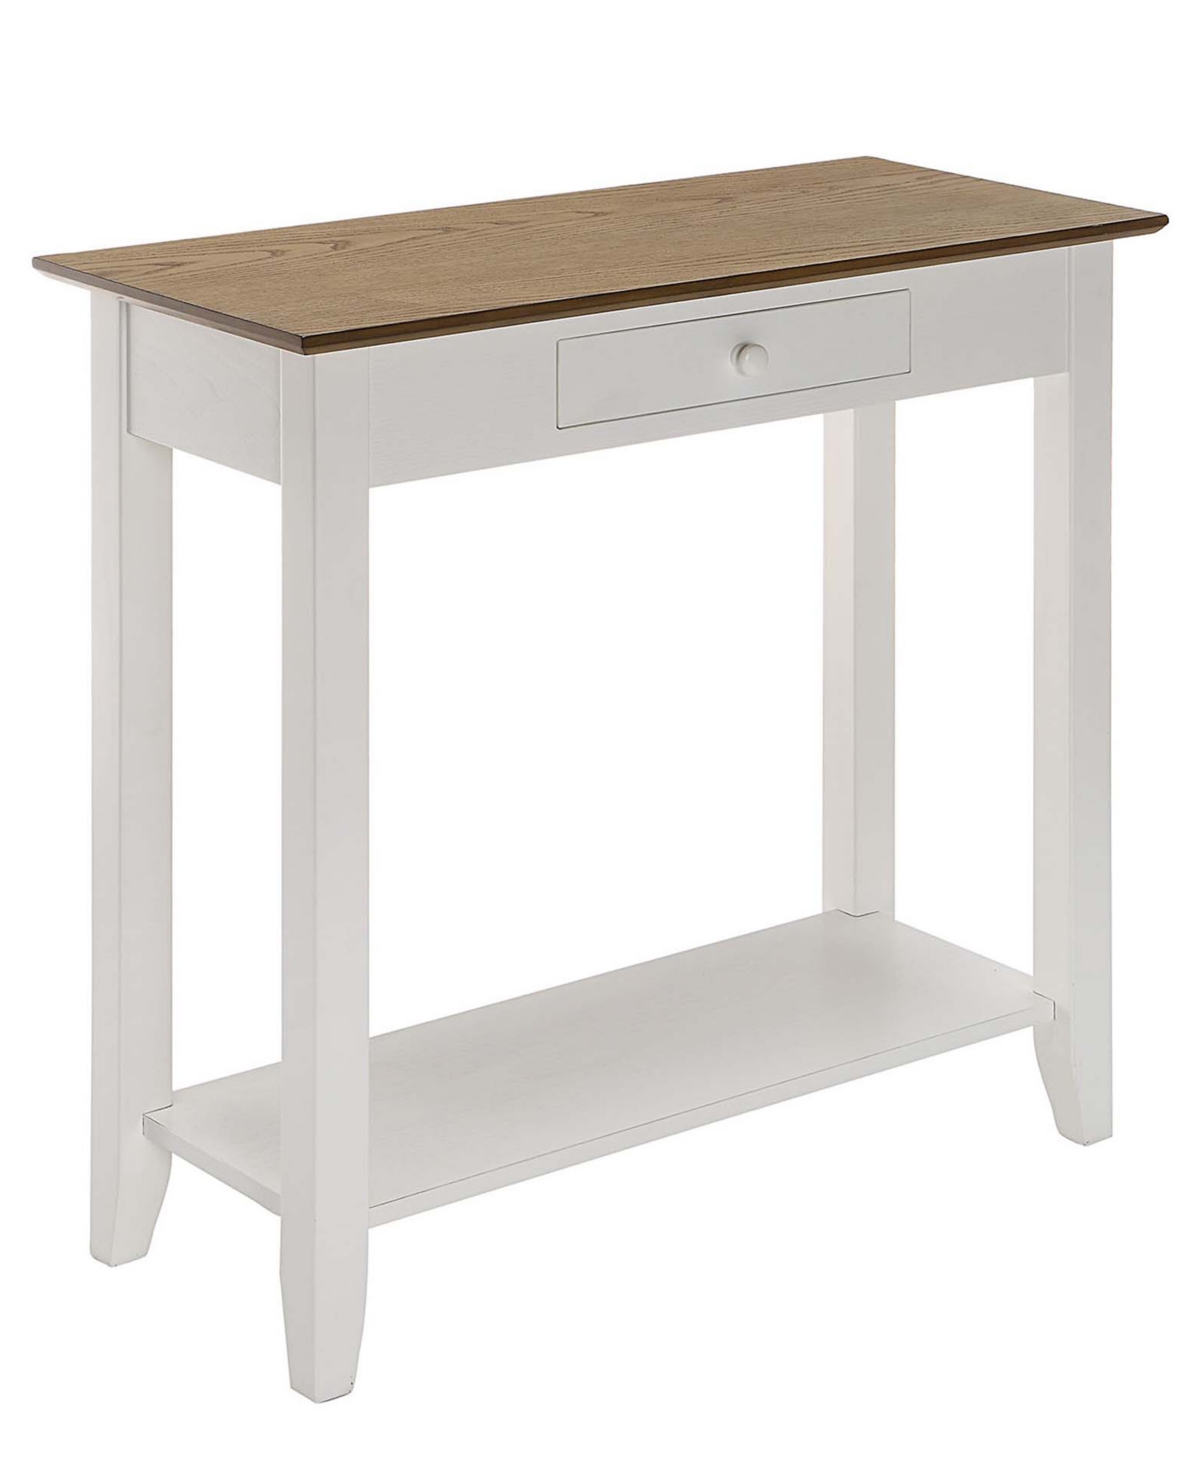 Convenience Concepts 31.5" Wood American Heritage 1 Drawer Hall Table In Driftwood,white